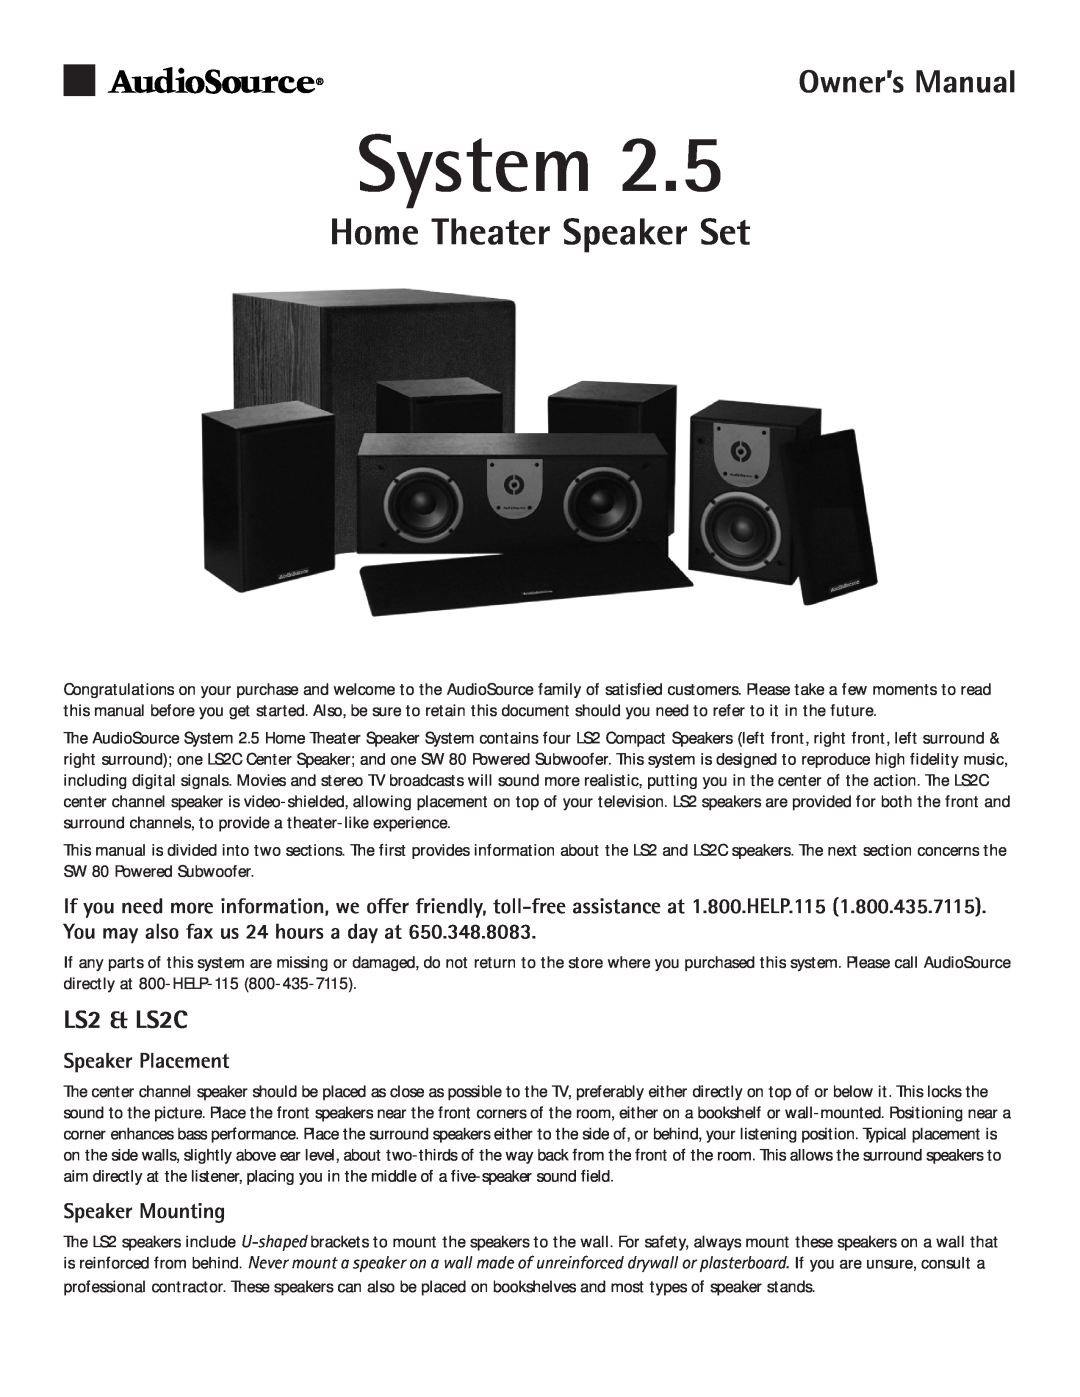 AudioSource System 2.5 owner manual LS2 & LS2C, Speaker Placement, Speaker Mounting, Home Theater Speaker Set 